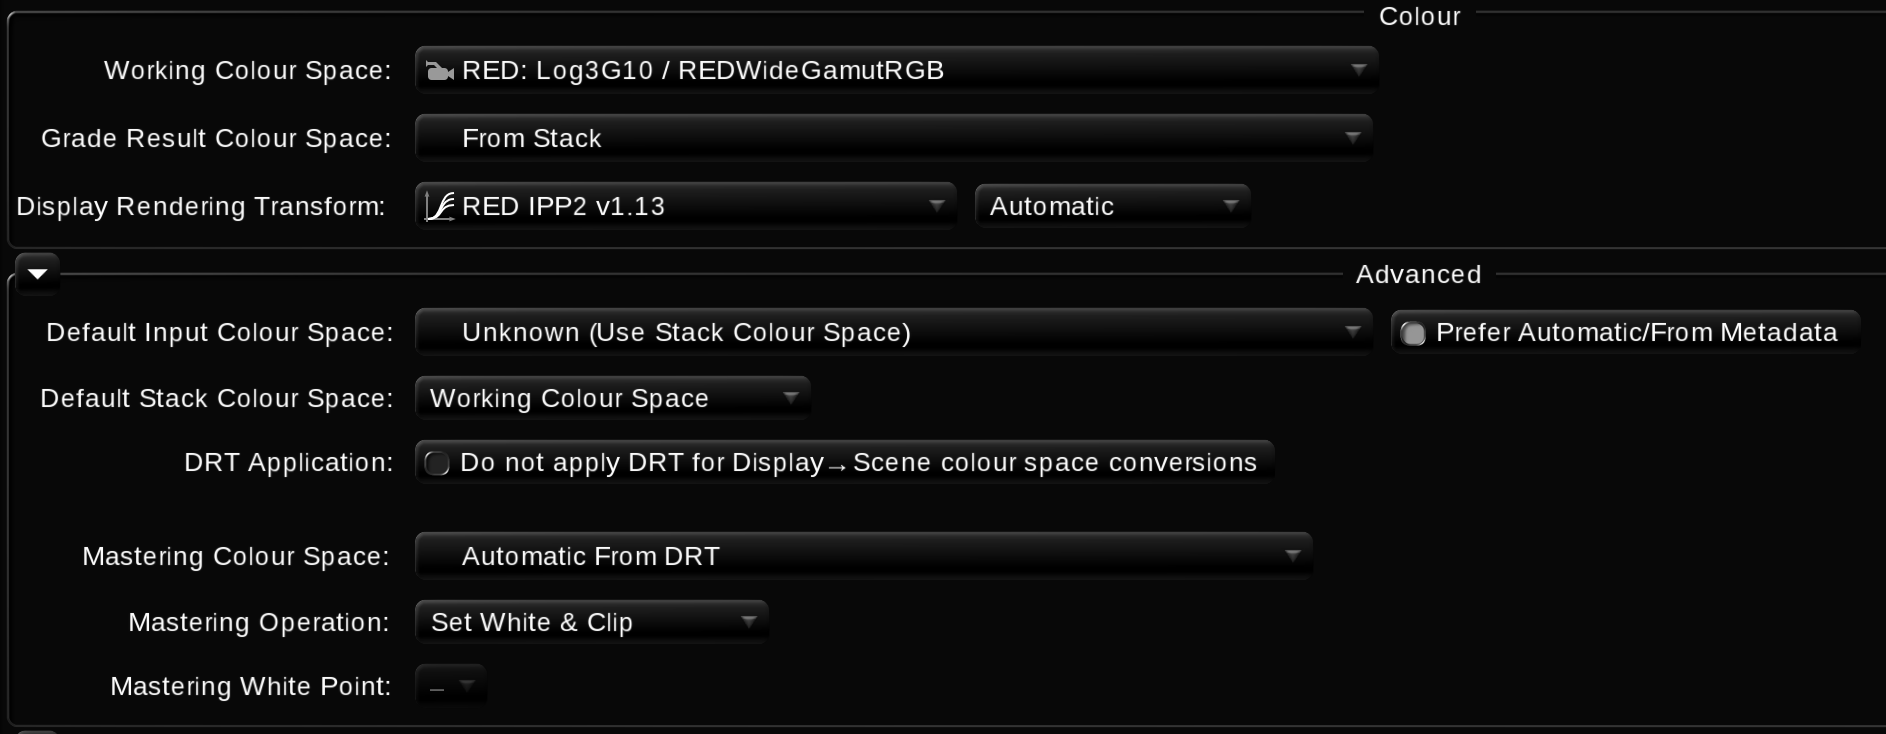 Color Managed Workflow in Baselight_Image07.png